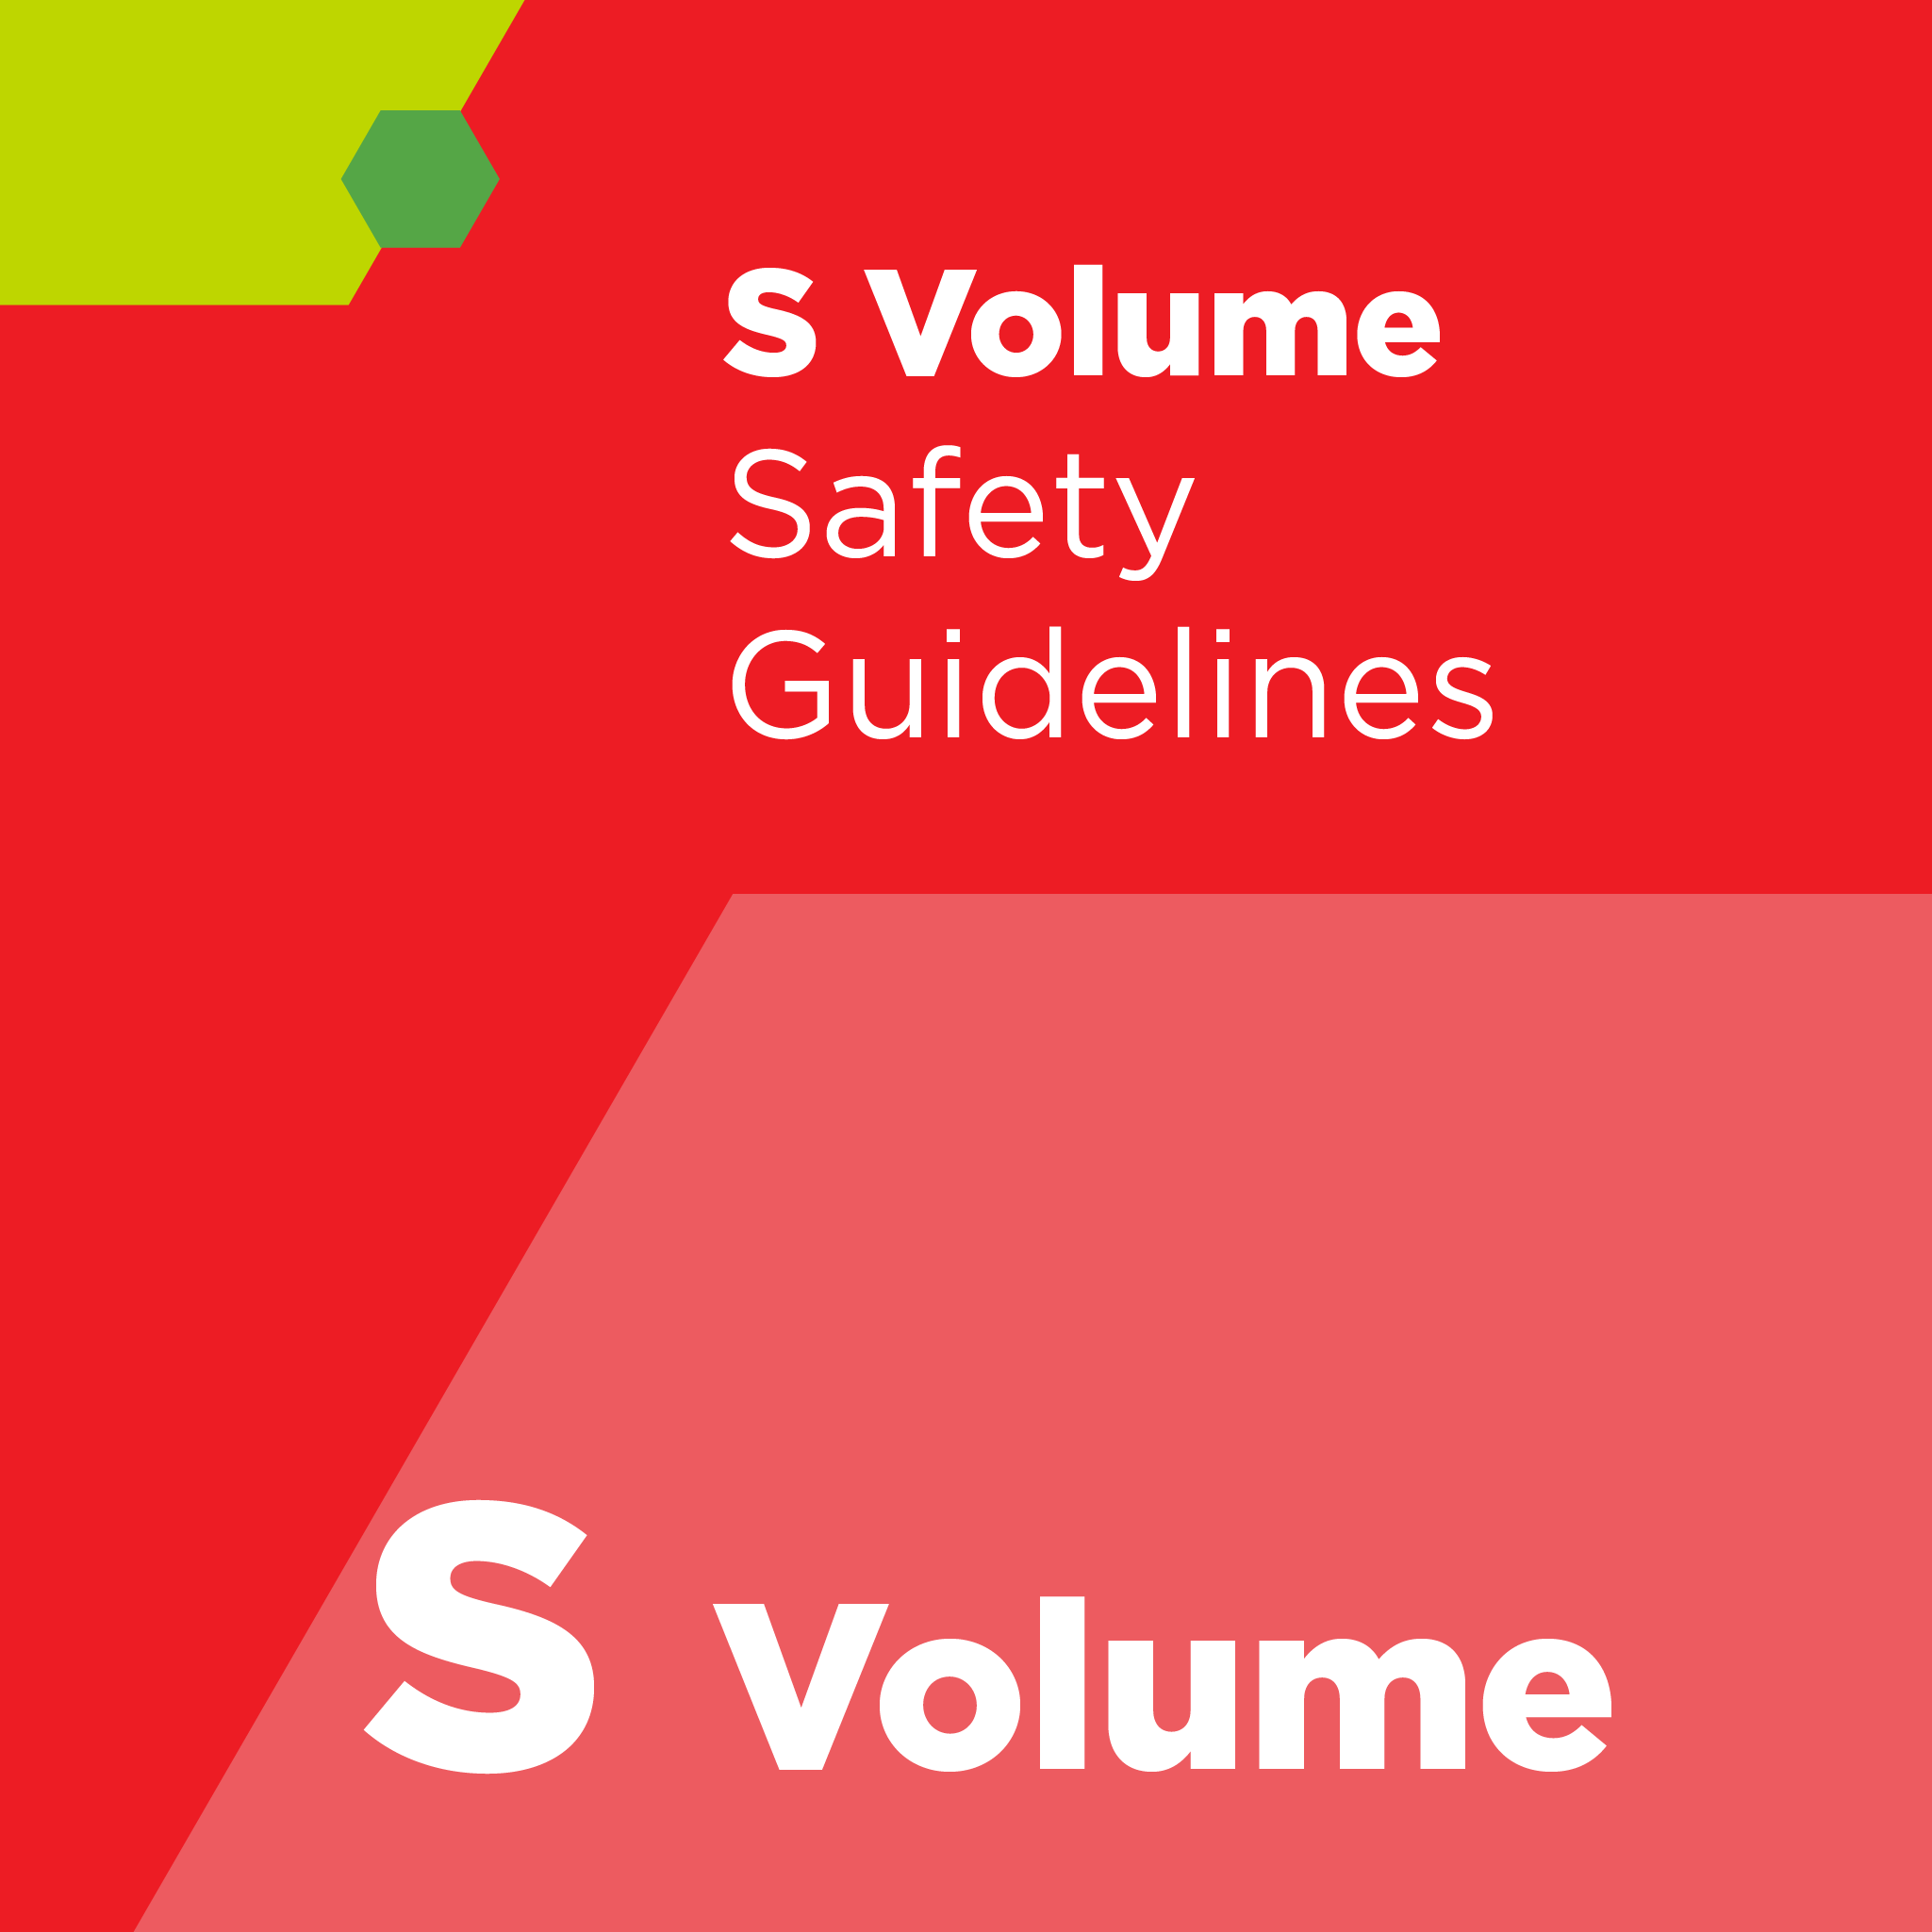 S01900 - SEMI S19 - Safety Guideline for Training of Manufacturing Equipment Installation, Maintenance and Service Personnel